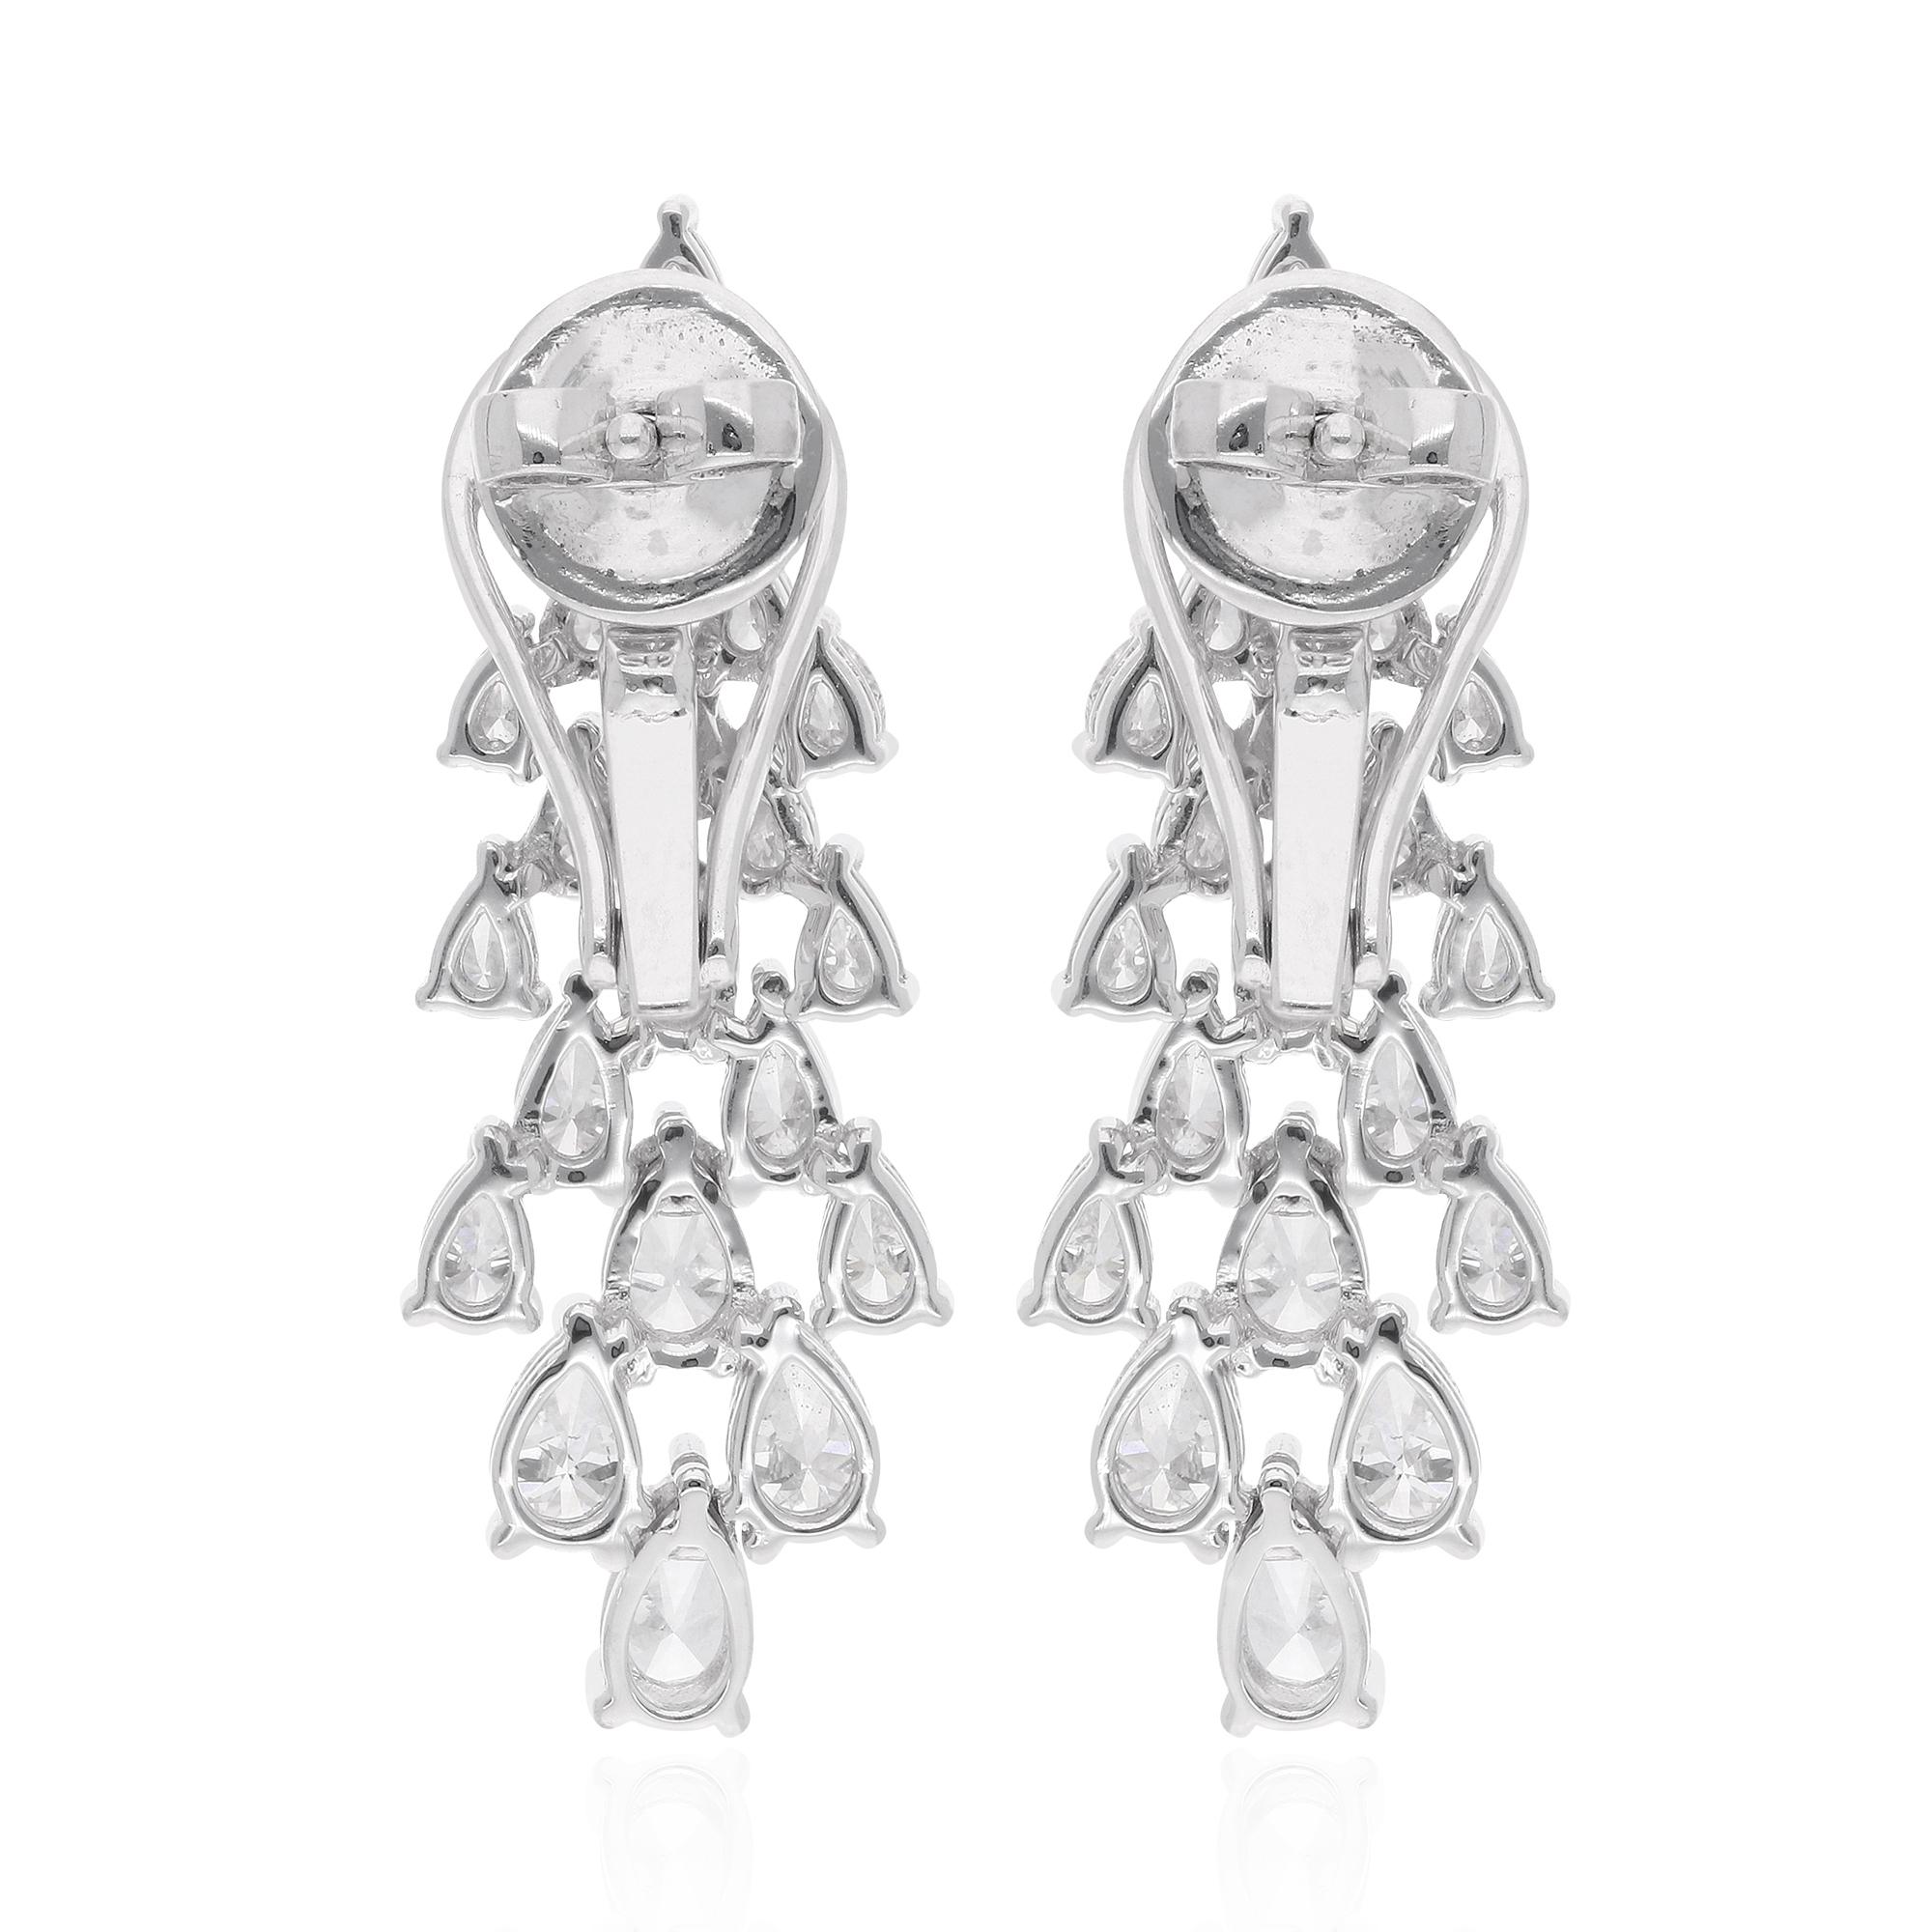 The pear-shaped diamond is known for its elegant and distinctive teardrop shape, which offers a combination of brilliance and uniqueness. The natural diamonds used in the earrings are formed over millions of years, giving them their inherent beauty